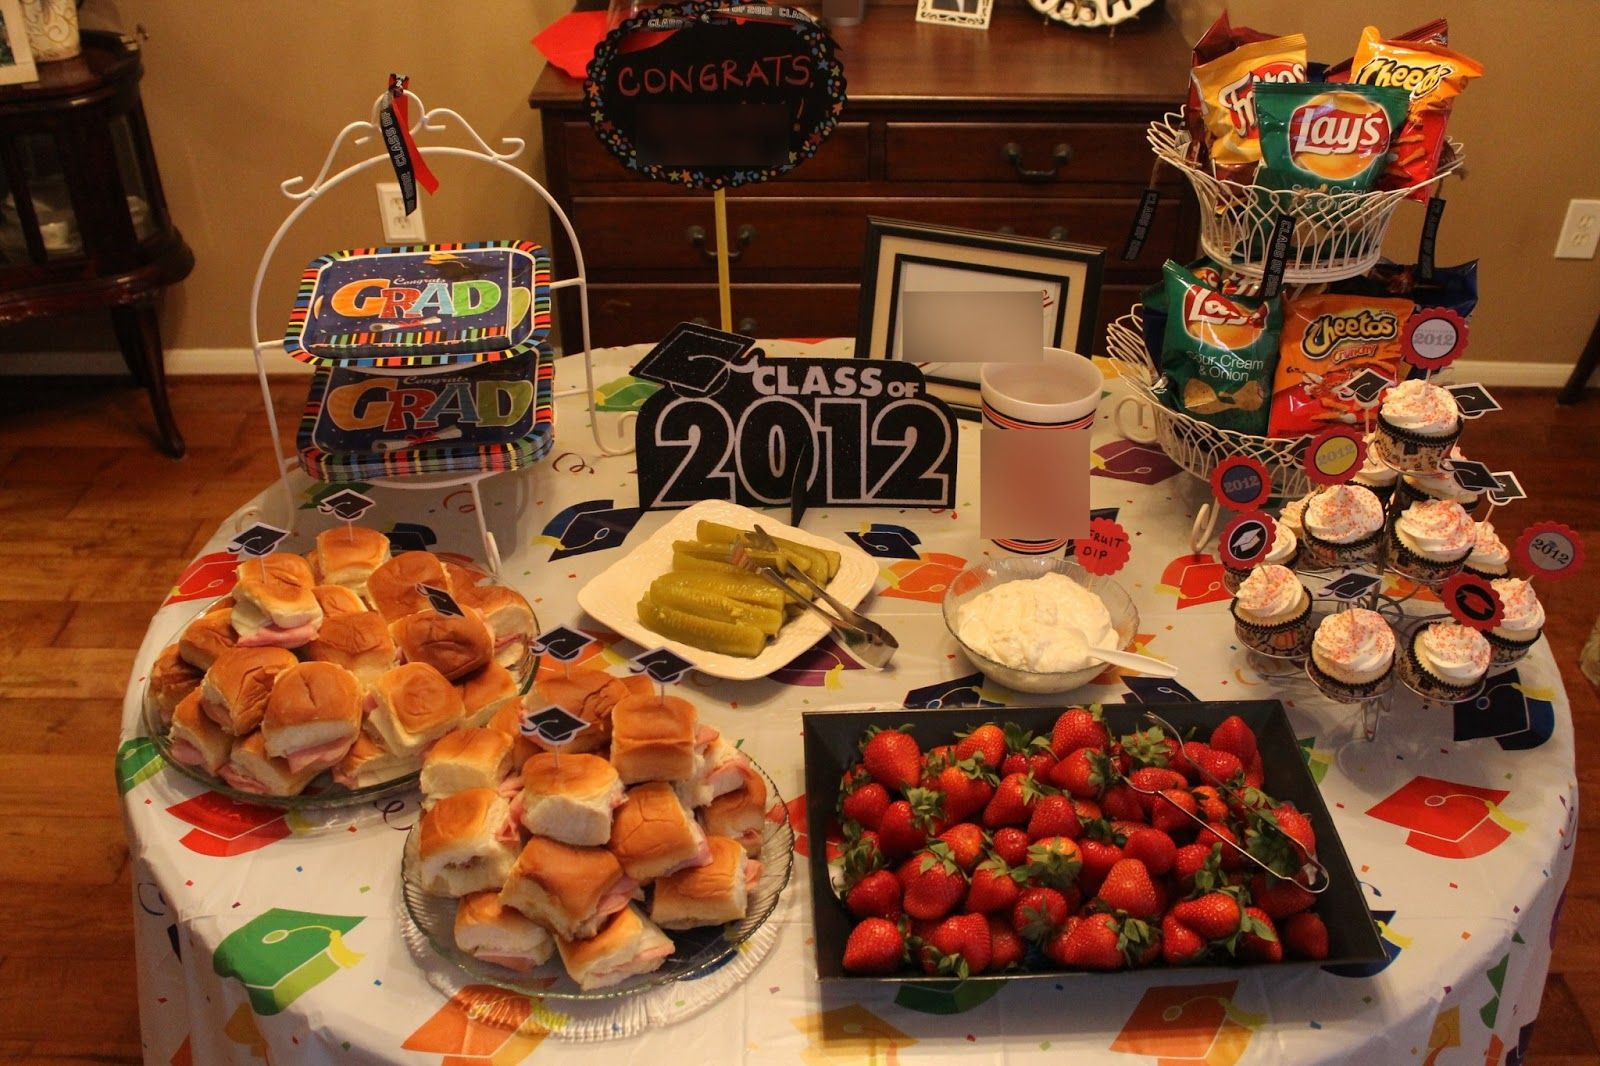 Inexpensive Graduation Party Food Ideas
 Graduation Party Gift Ideas